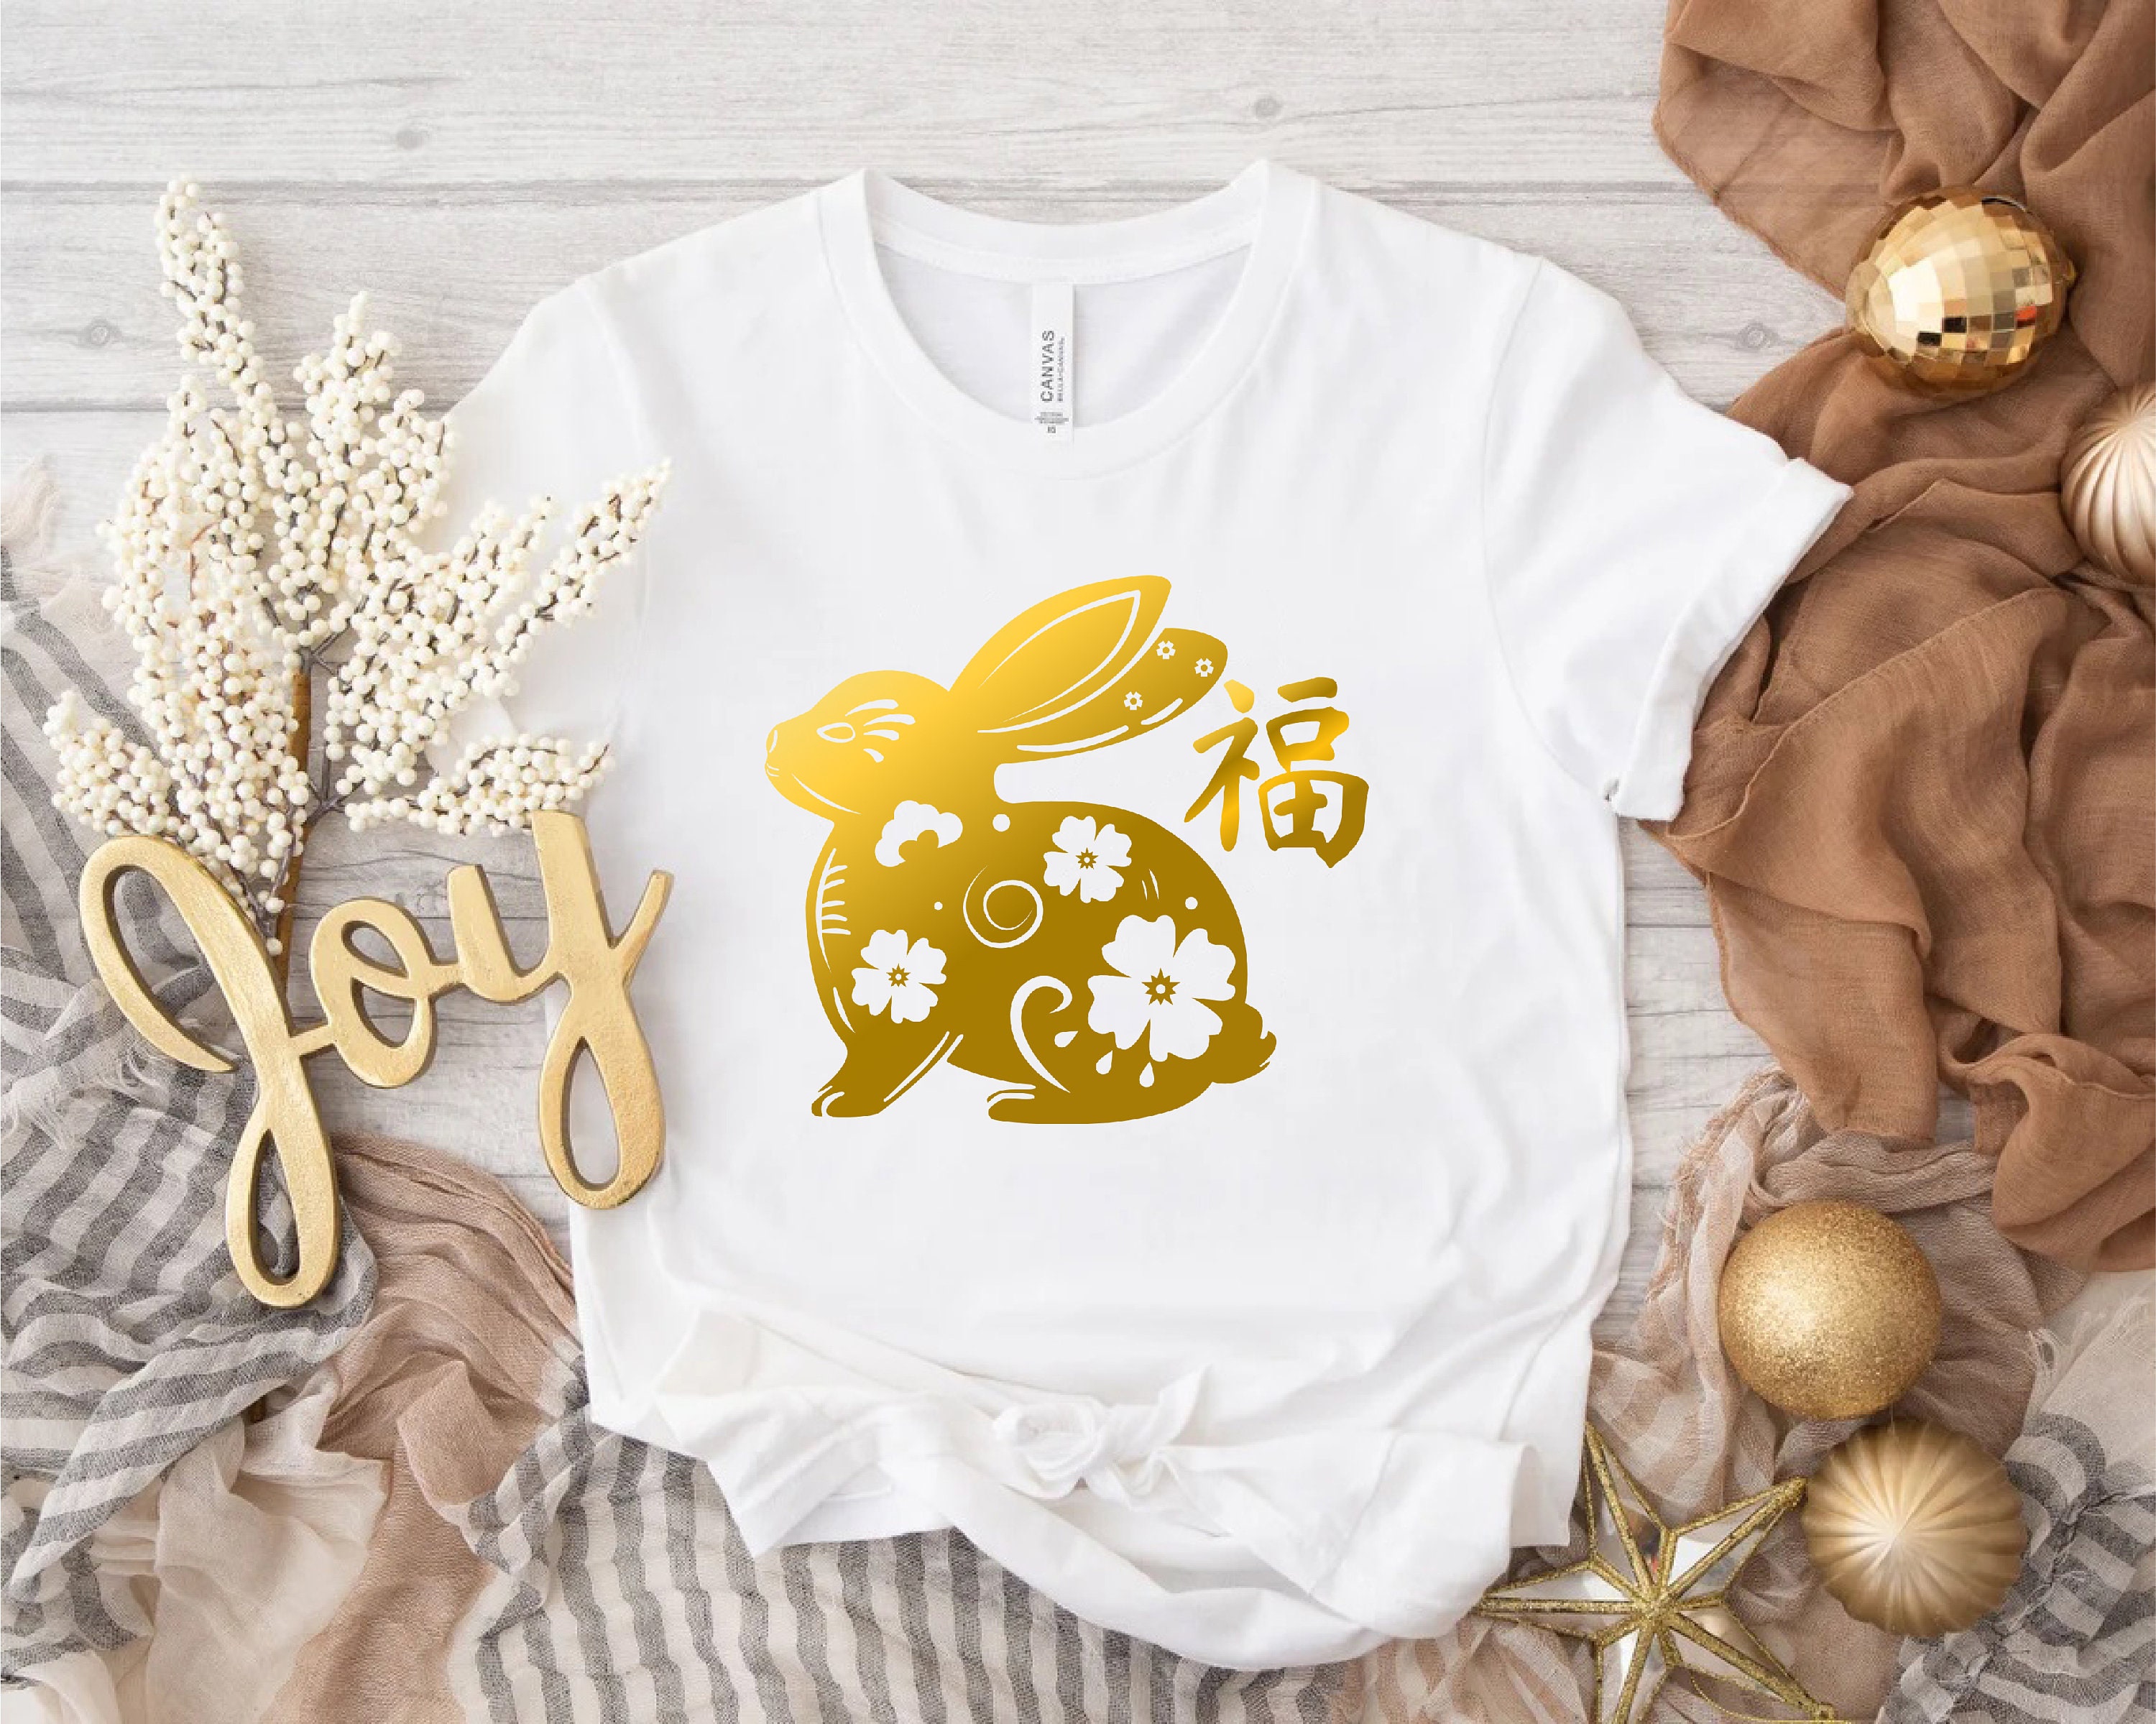 2023 Year Of The Rabbit T-shirt,The Year of The Rabbit Chinese Lunar New  Year Shirt sold by YULIIA MEI, SKU 38856586